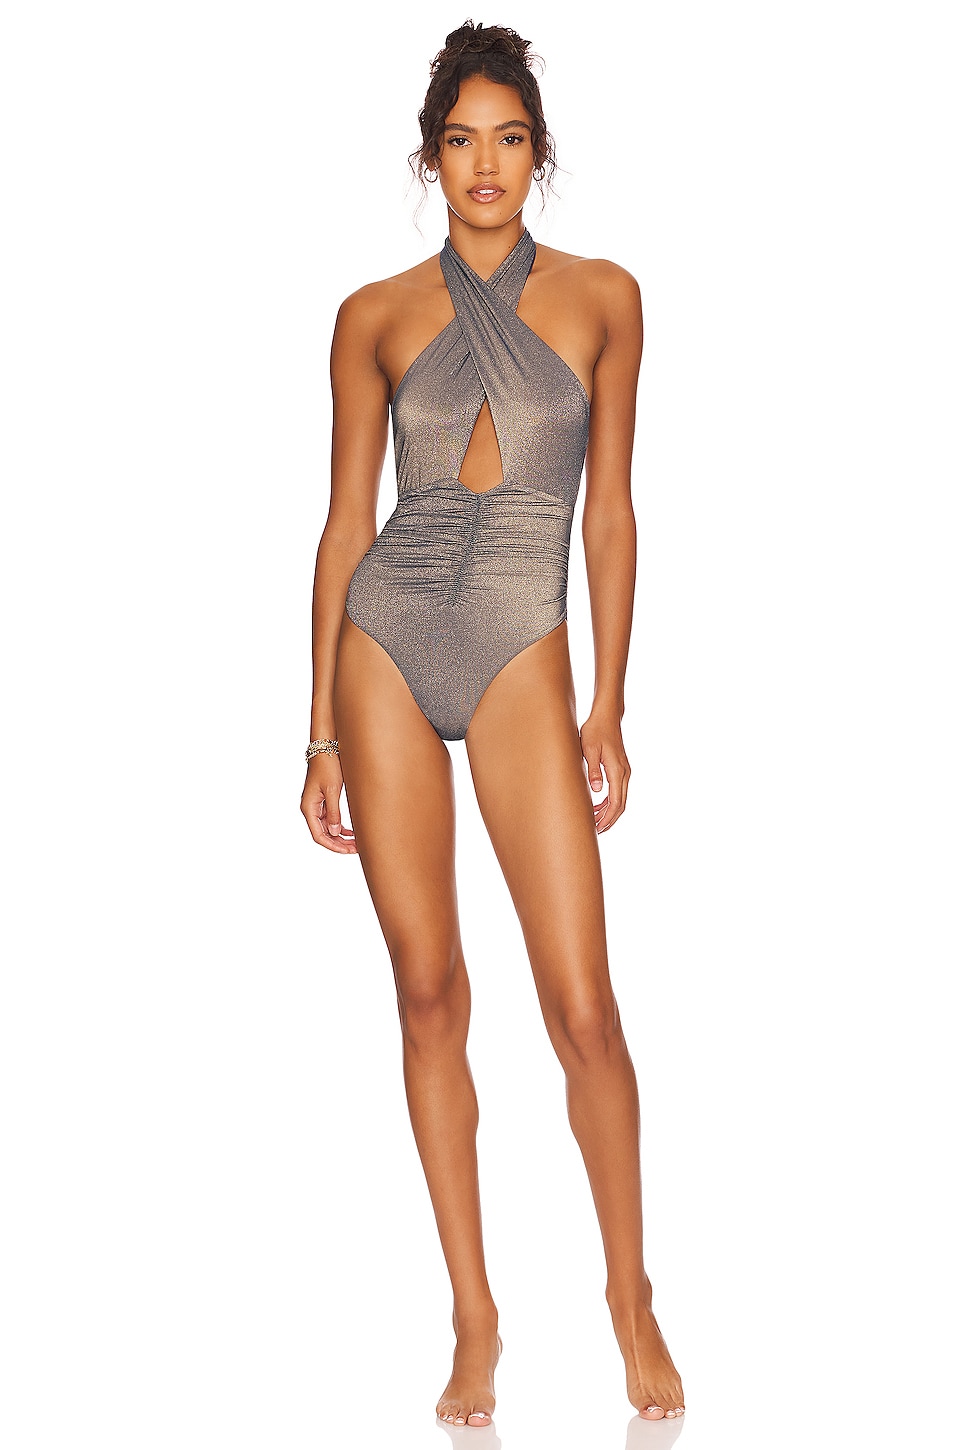 Celine Ruched One Piece in Starboard 